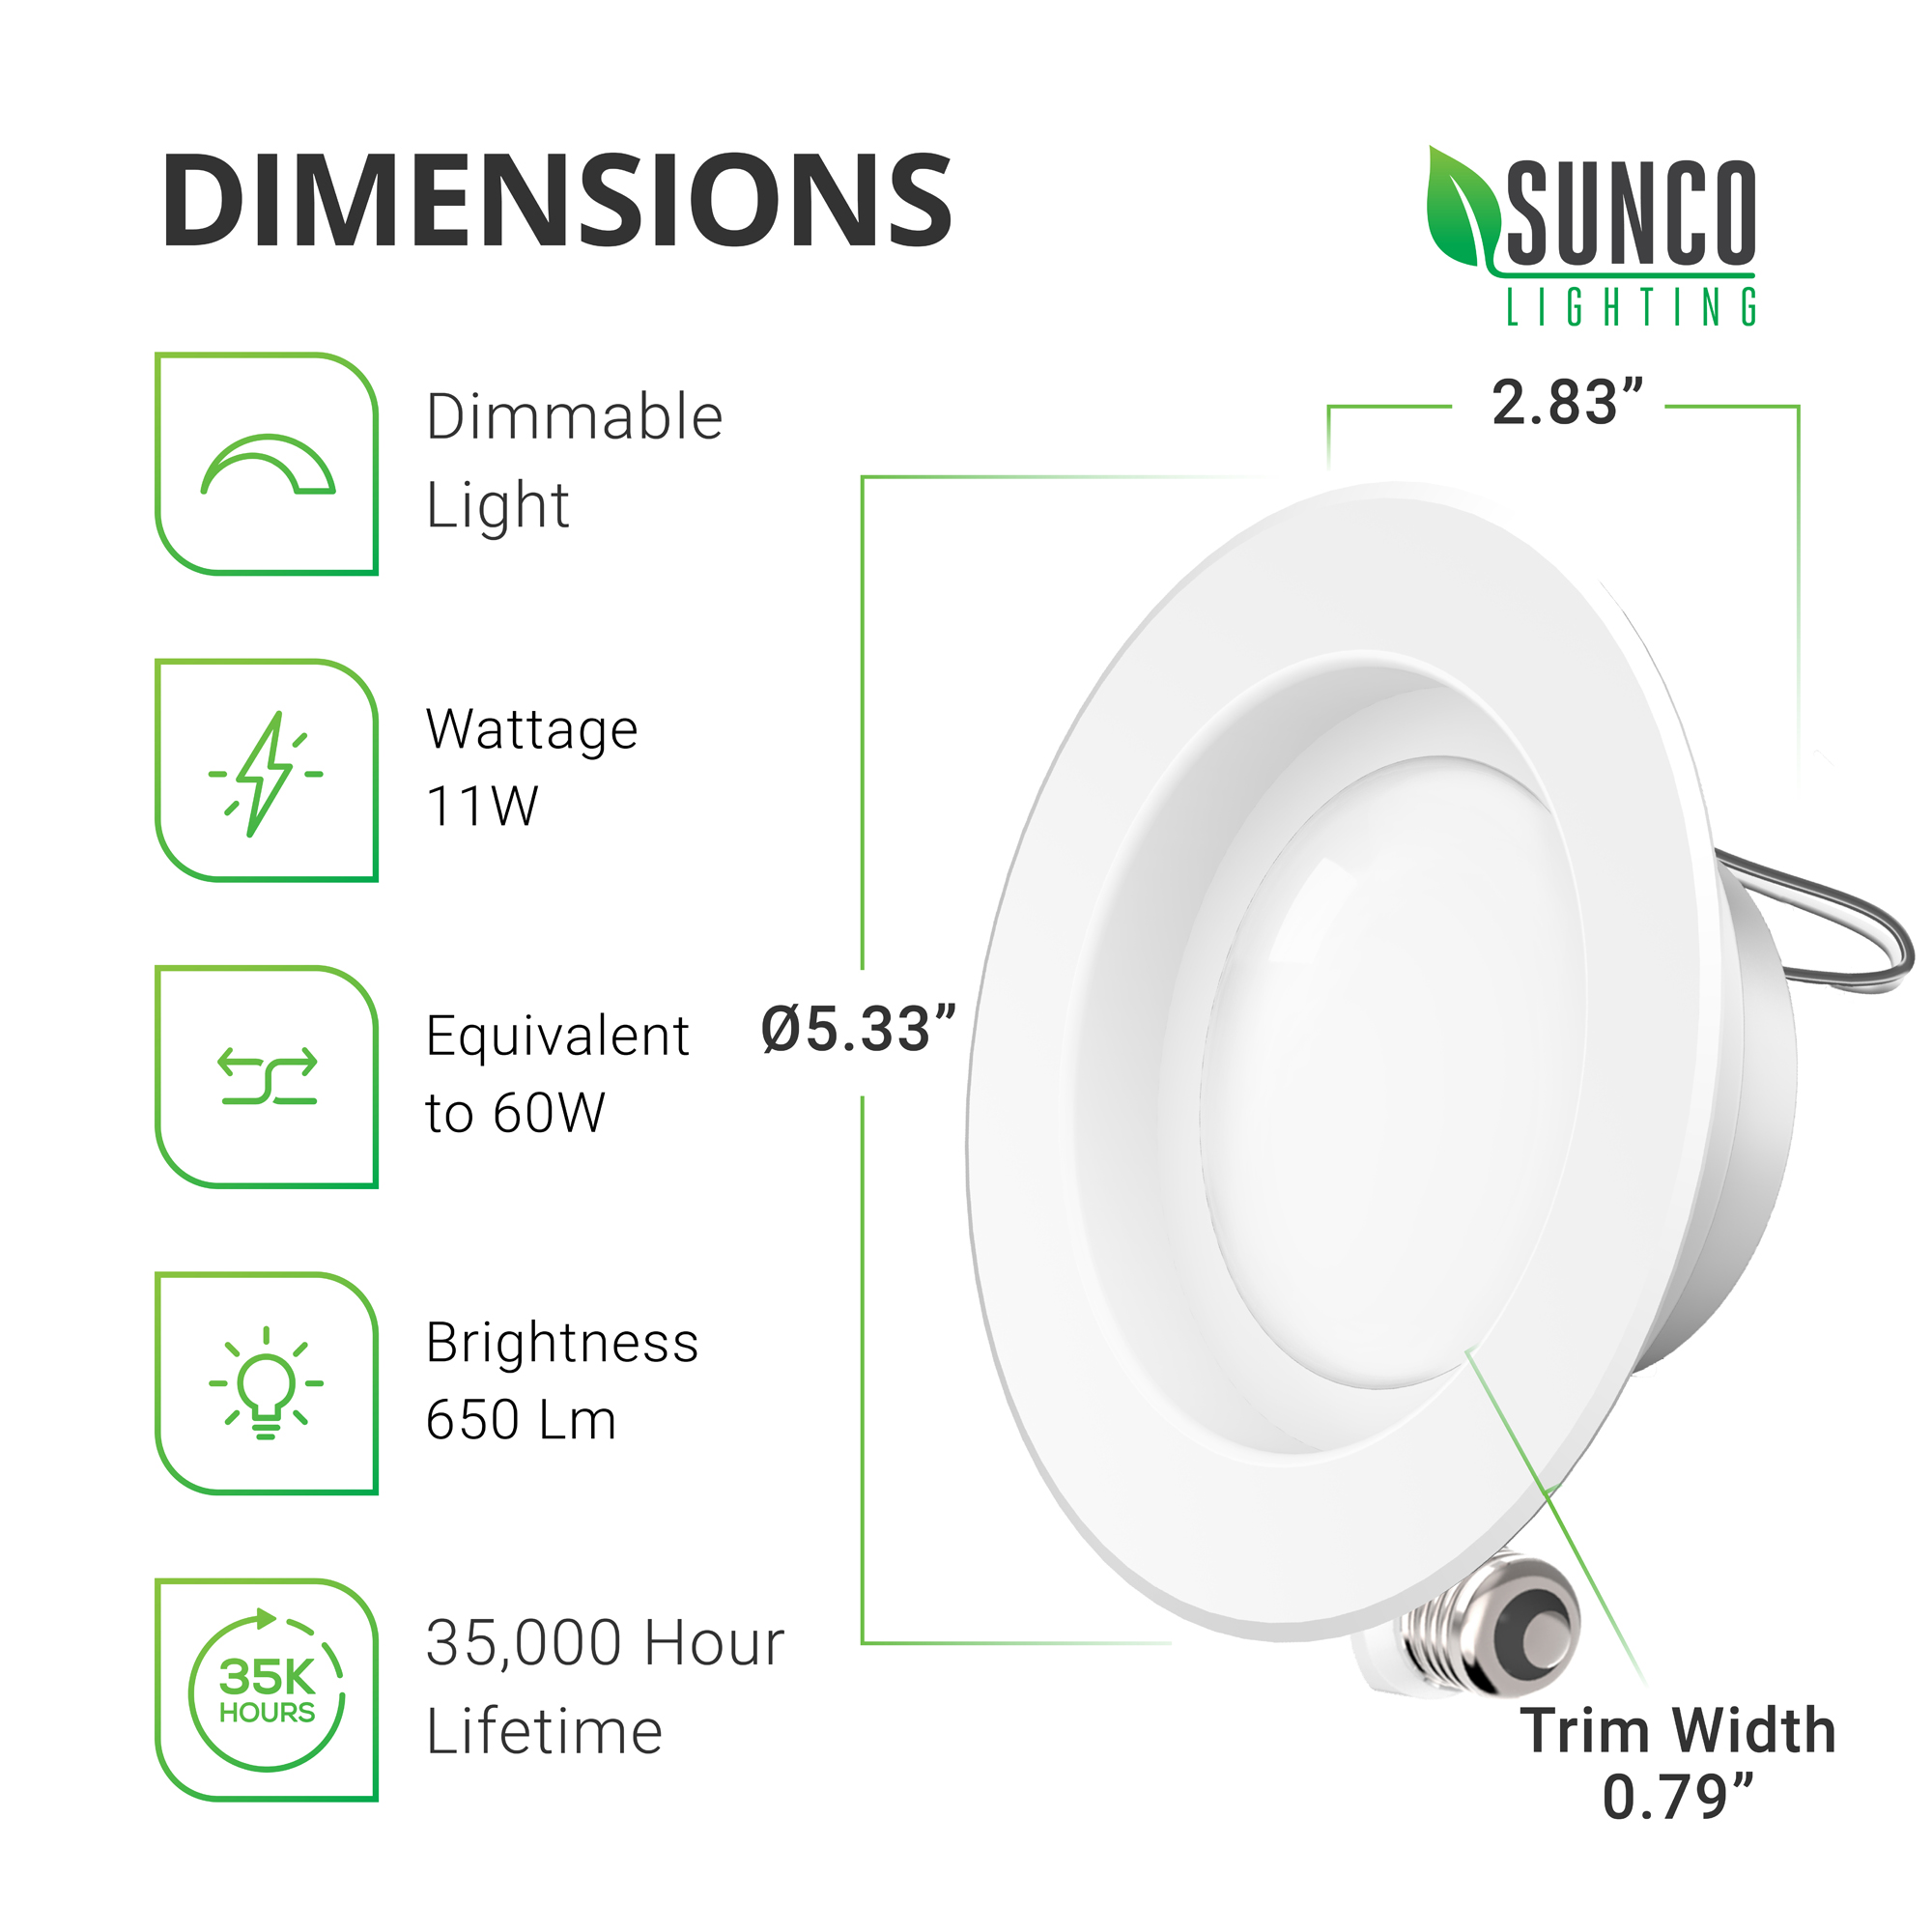 Sunco Lighting 12 Pack Inch LED Recessed Downlight, Smooth Trim, Dimmable,  11W=40W, 3000K Warm White, 660 LM, Damp Rated, Simple Retrofit Installation  UL Energy Star